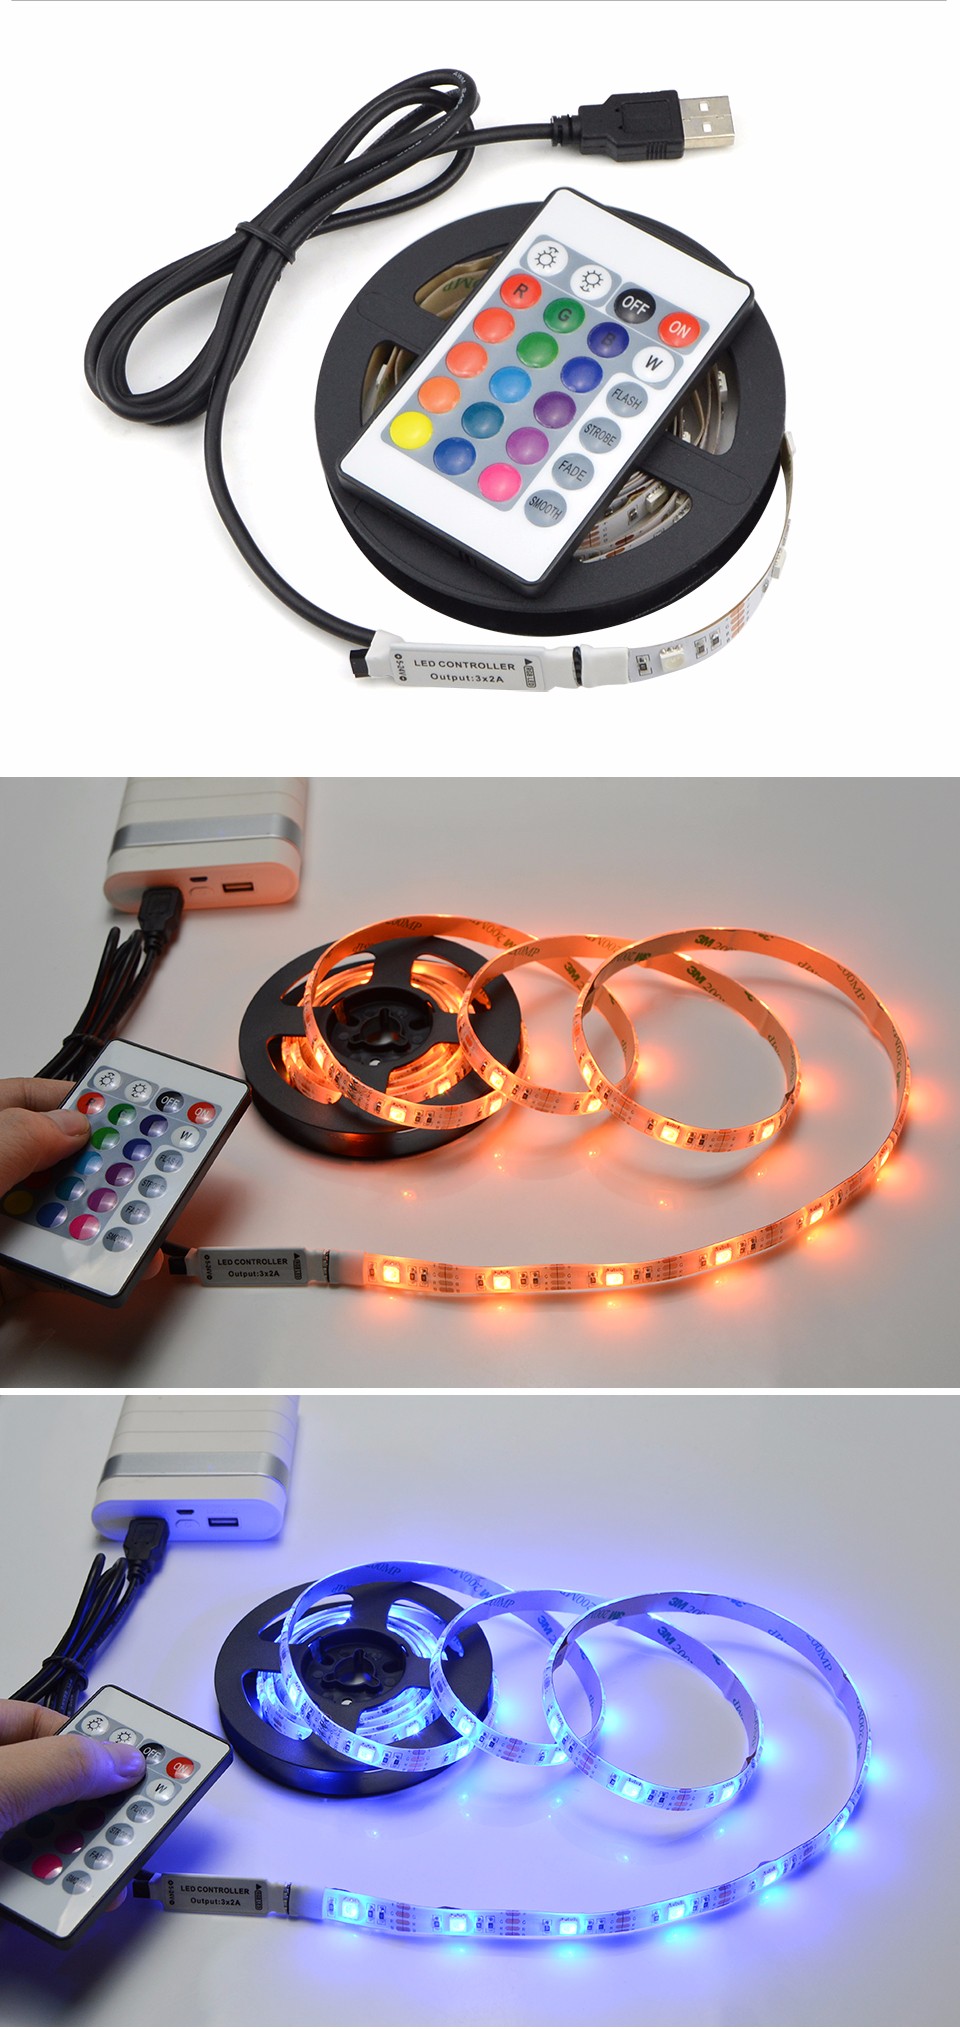 LED light 5050 SMD RGB USB cable charger 5V LED Strip light 1m 2m IP20 IP65 waterproof remote control for home Lighting lamp